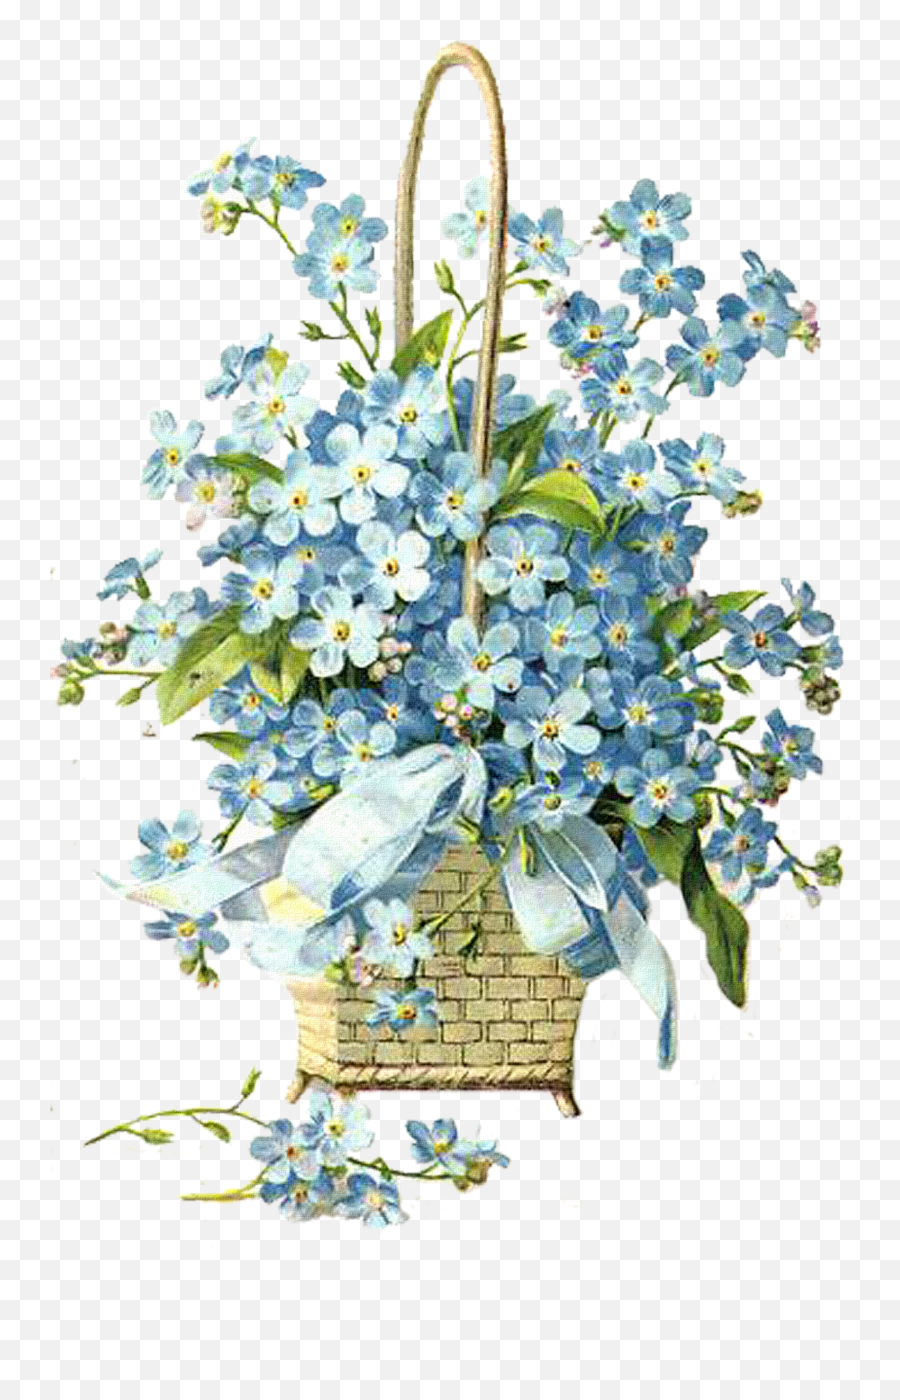 Library Of Blue Flower Bouquet Image - Flower Emoji,Forget Me Not Flowers Clipart